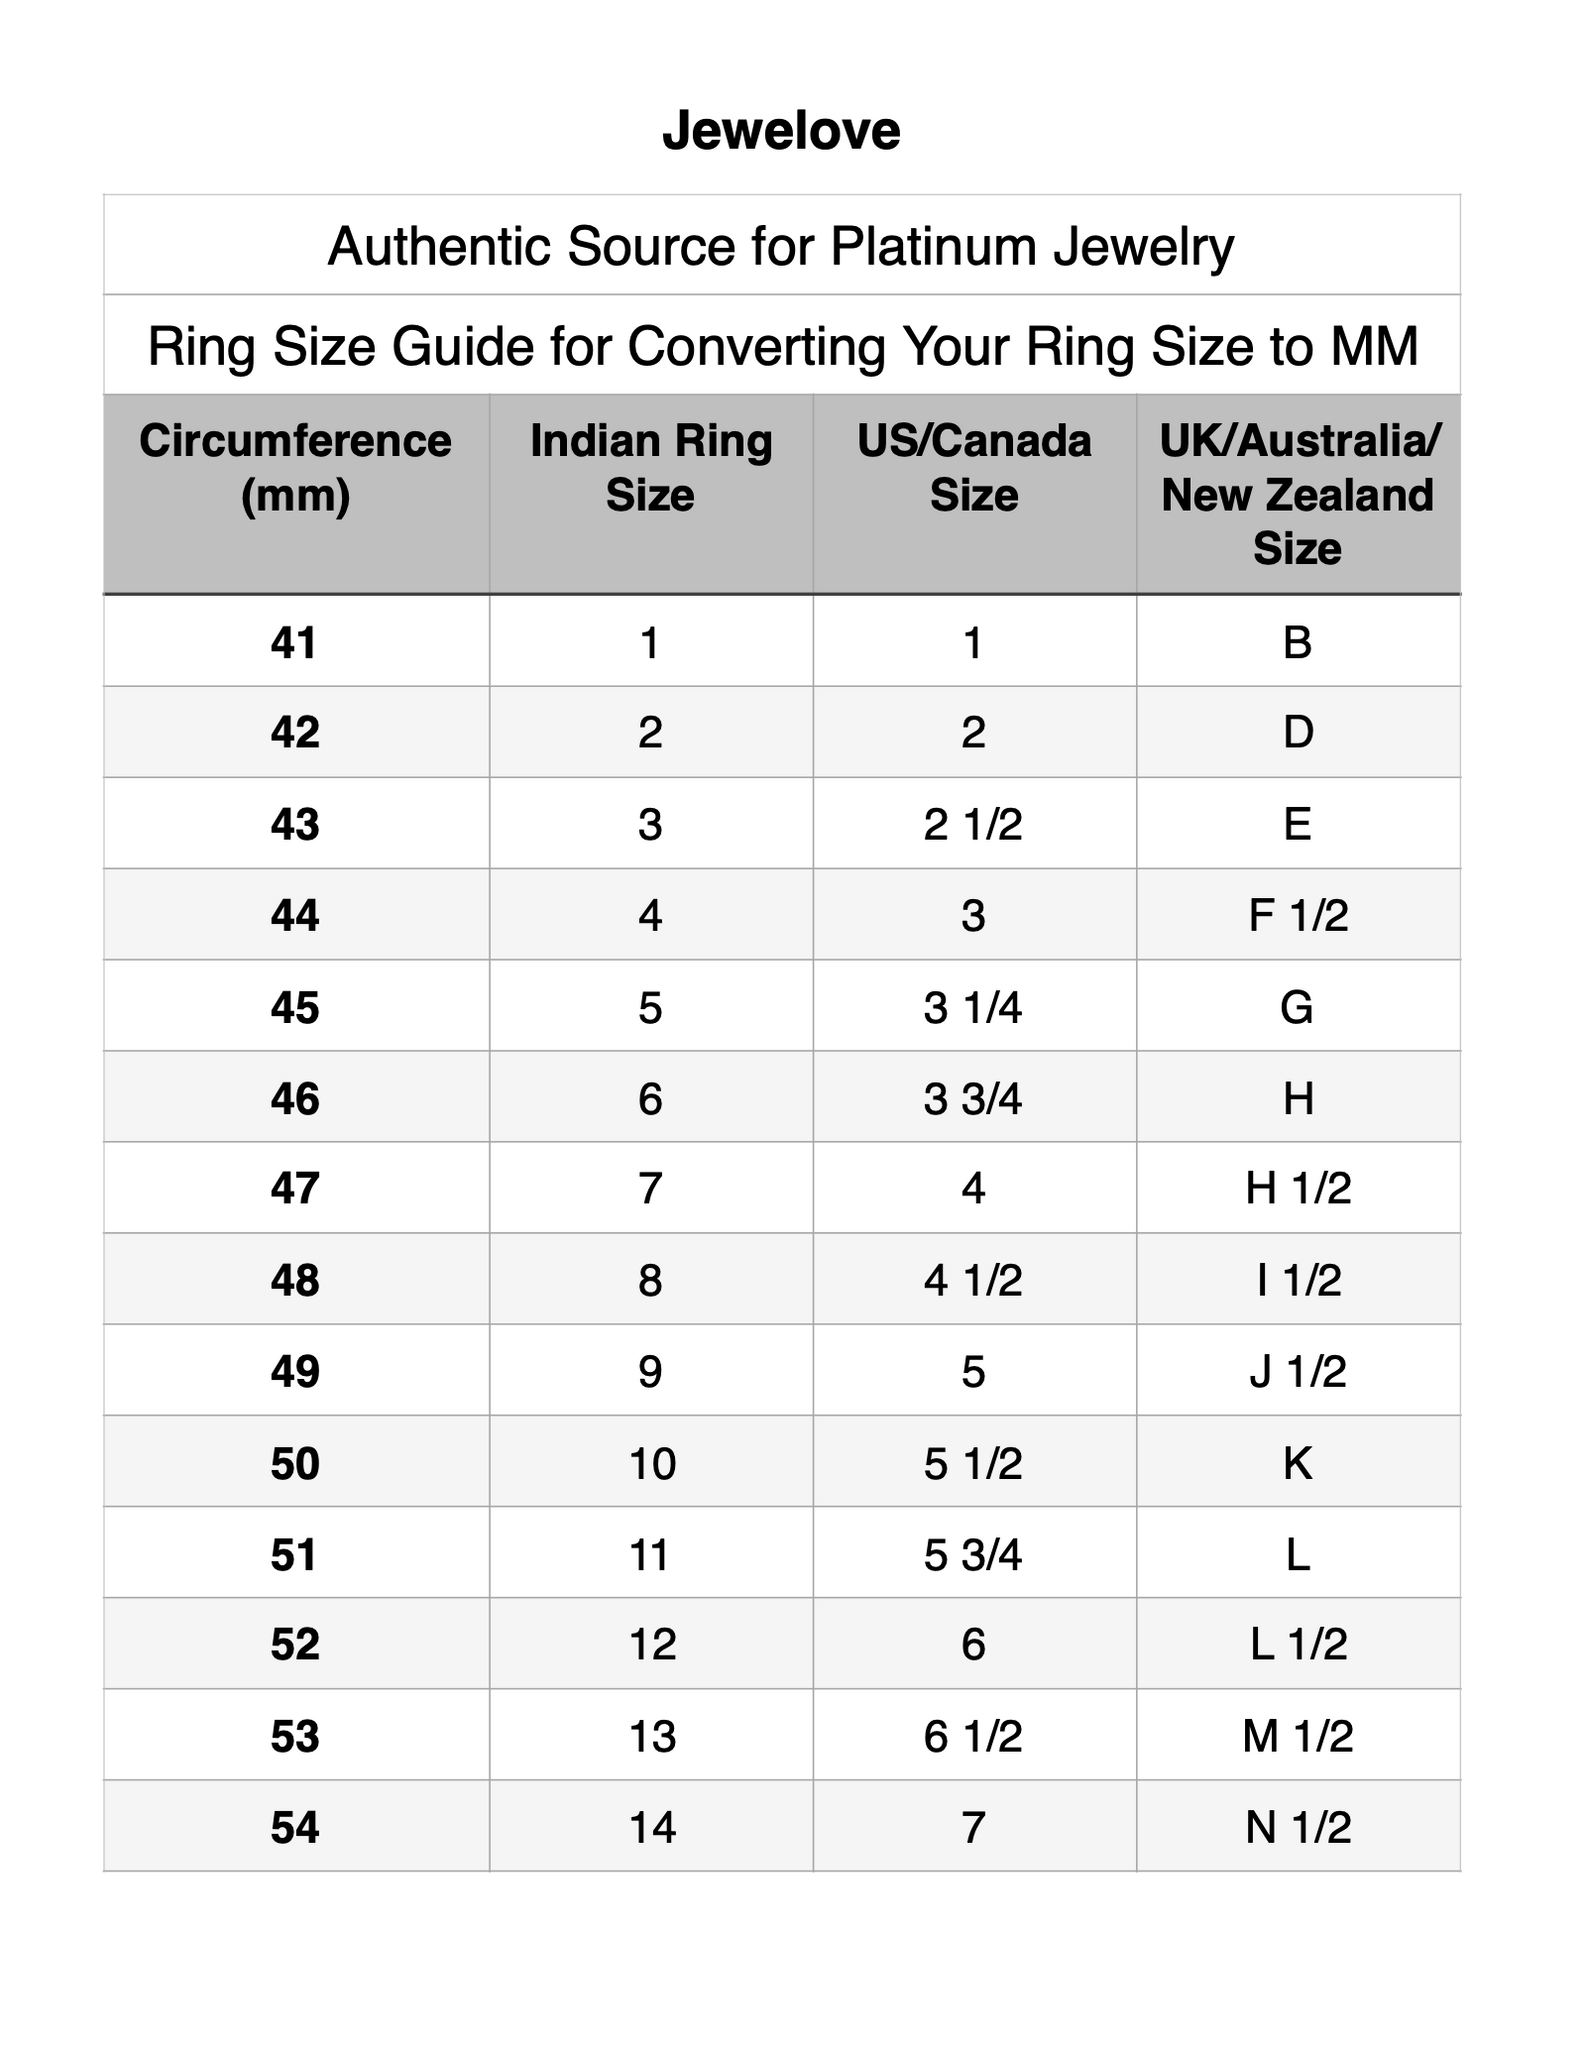 Ring Sizing Chart - workingsilver.com | Jewelry Making Tools & Supplies